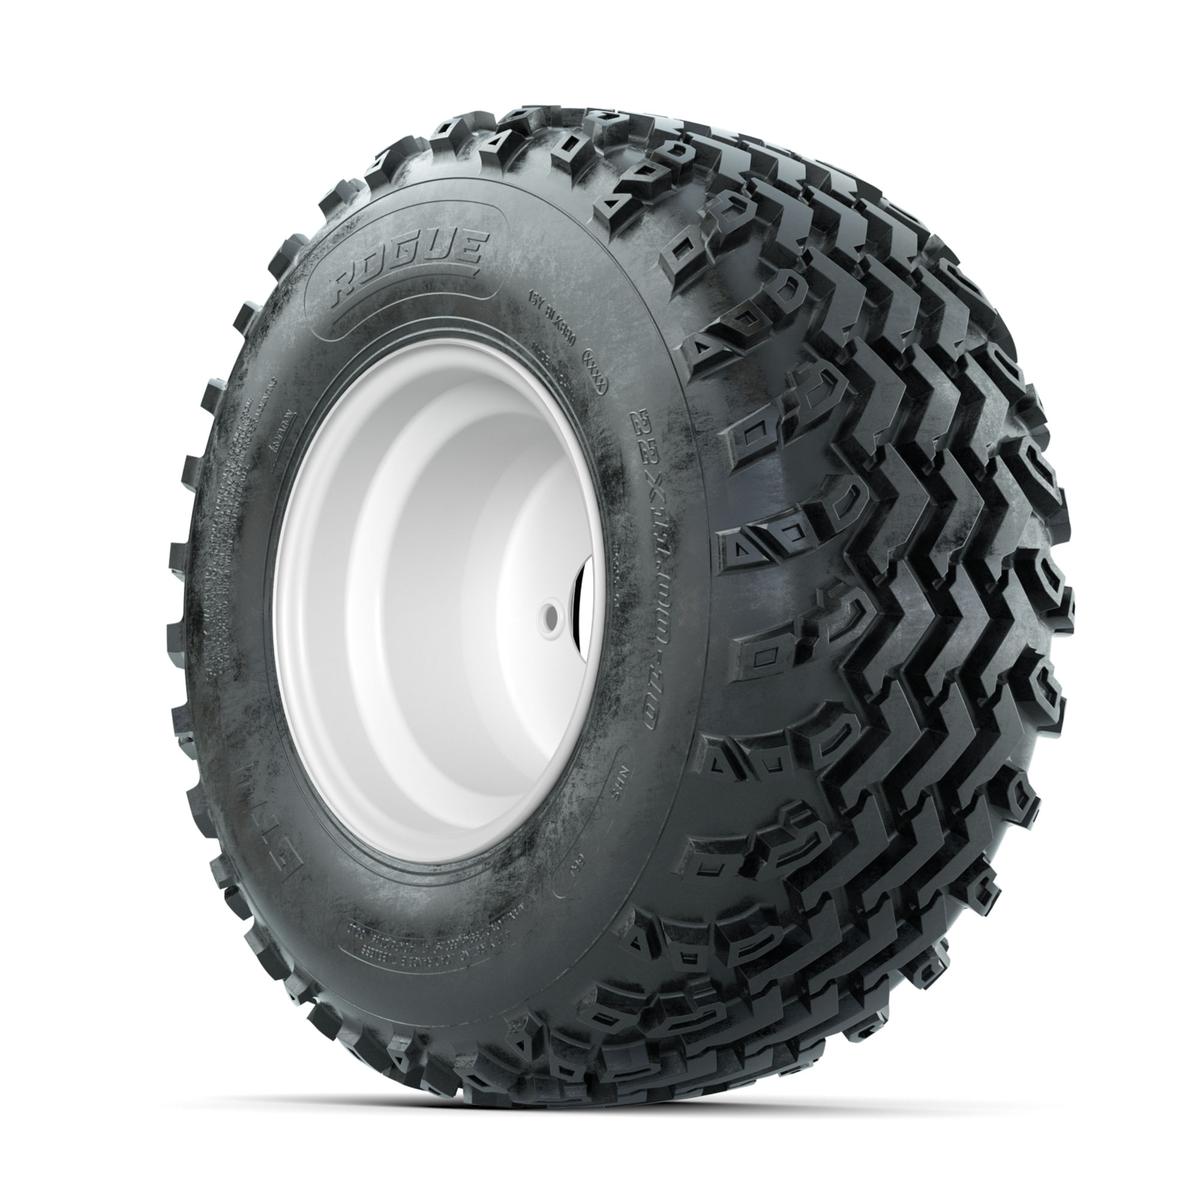 GTW Steel White 3:5 Offset 10 in Wheels with 22x11.00-10 Rogue All Terrain Tires – Full Set